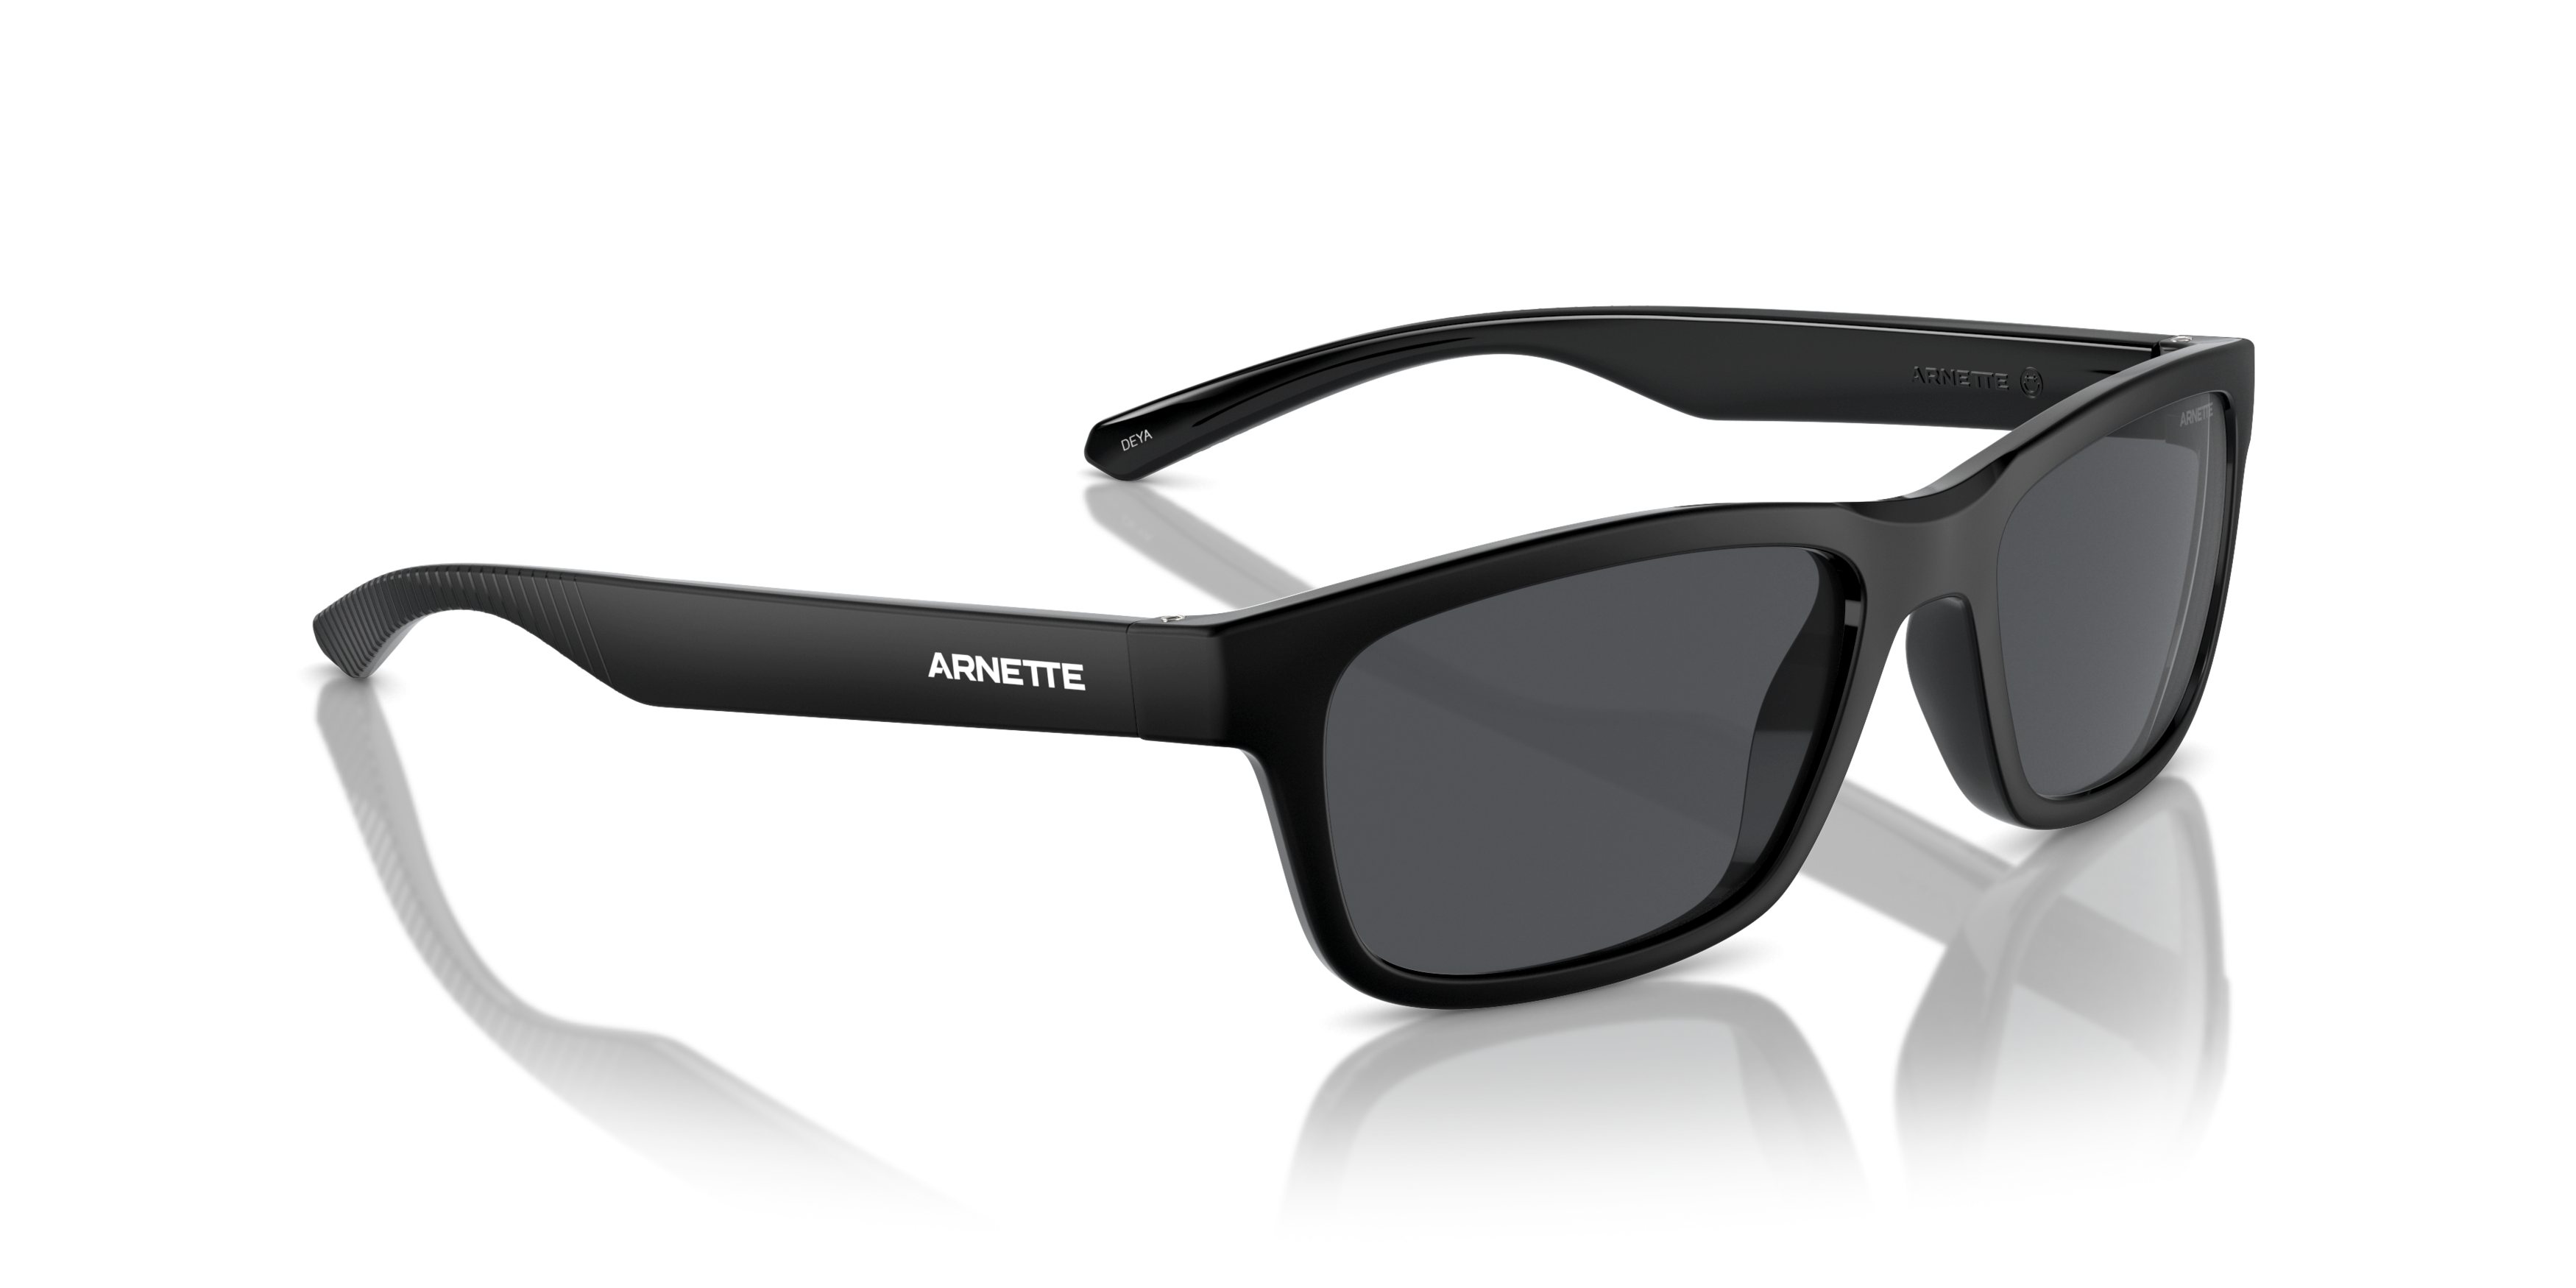 [products.image.angle_right01] Arnette AN4340 Children's Sunglasses